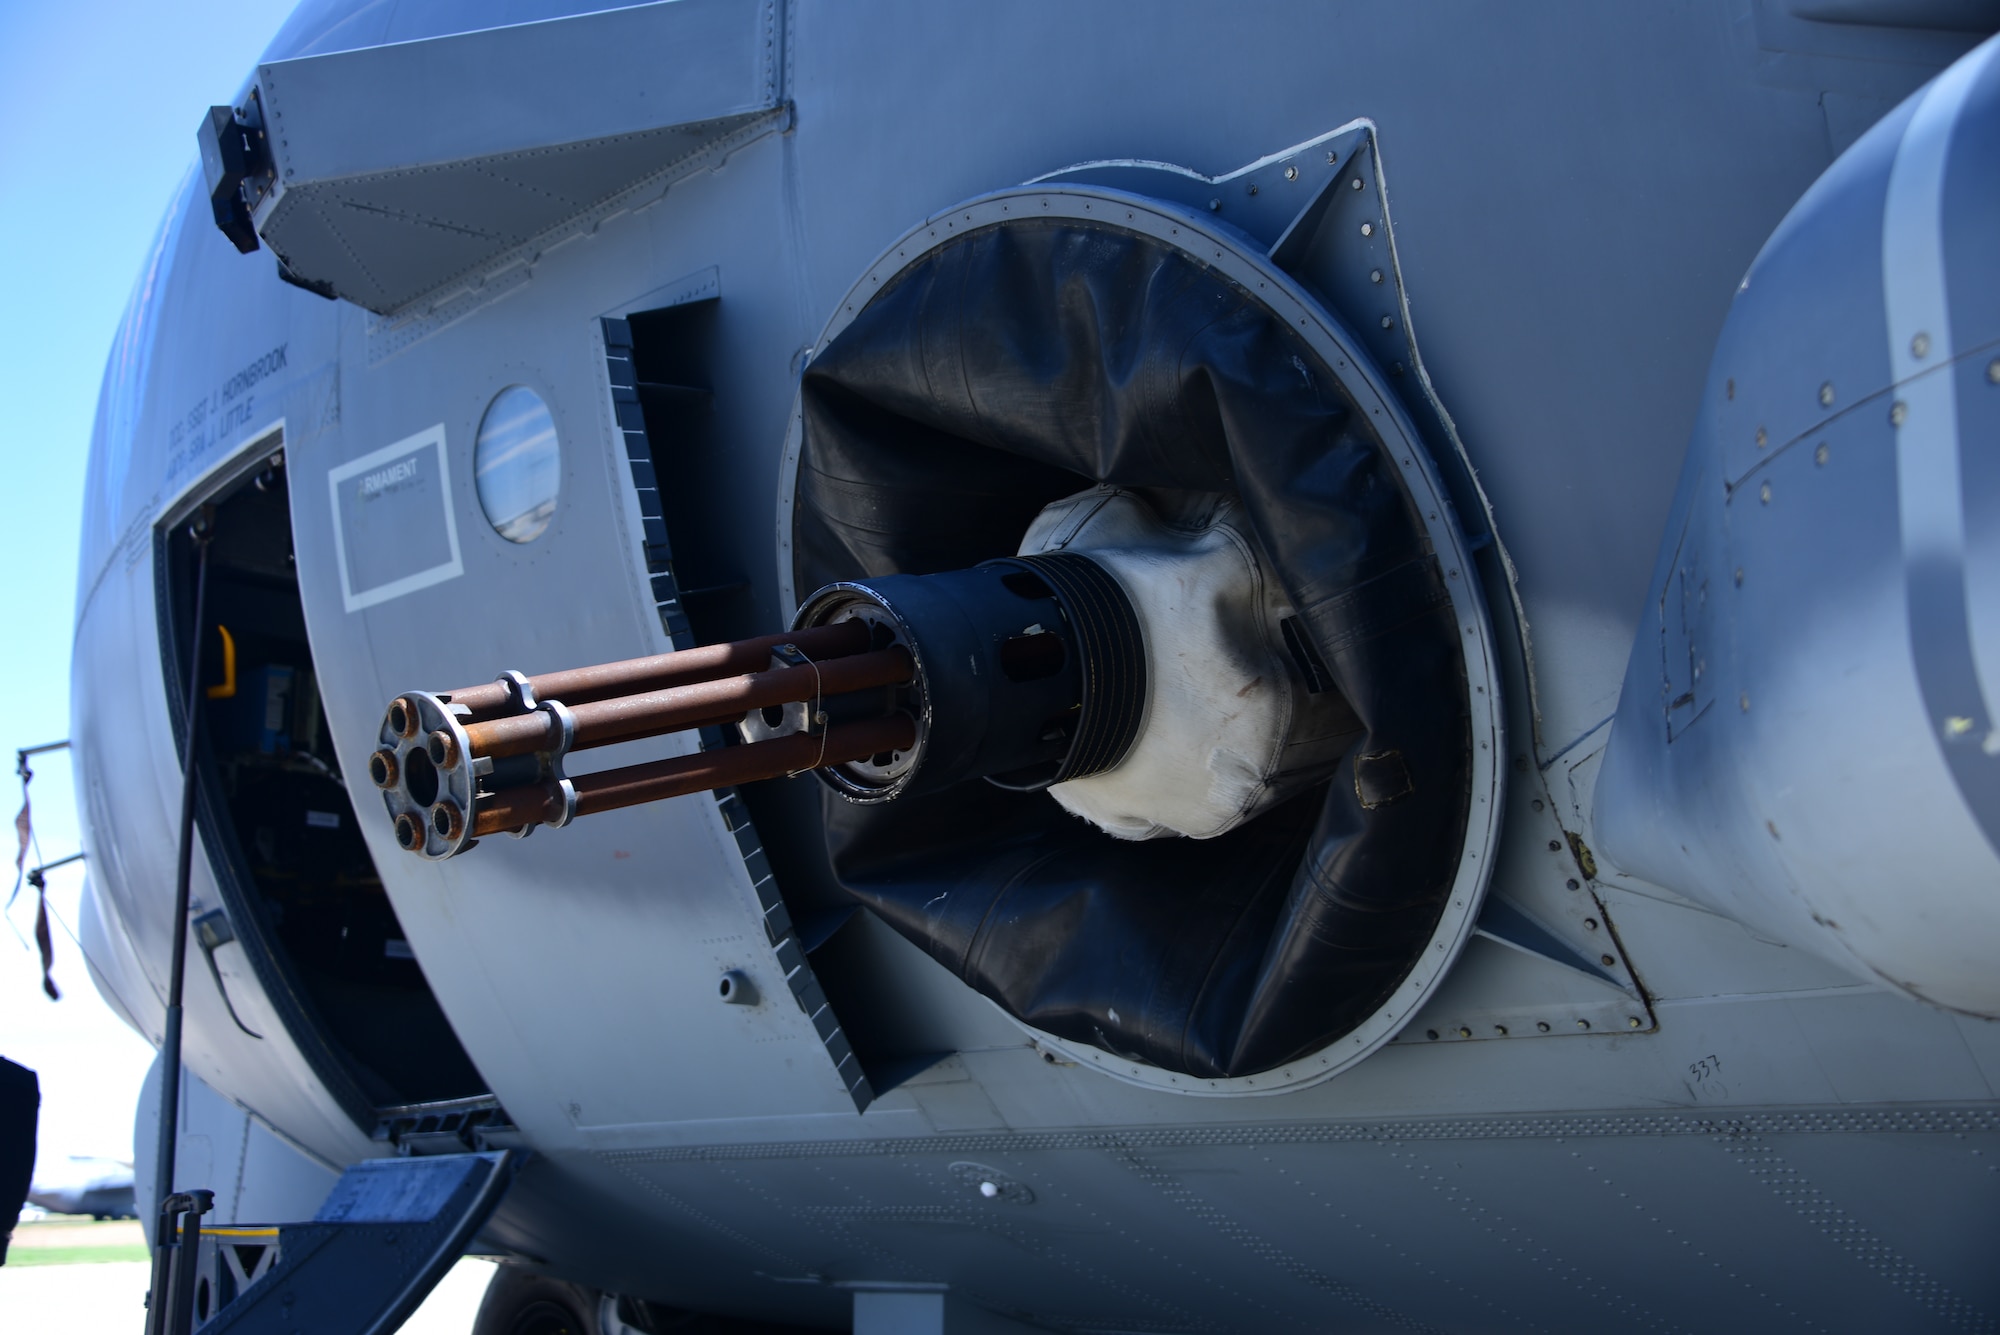 a photo of the gun located on the AC-130 aircraft